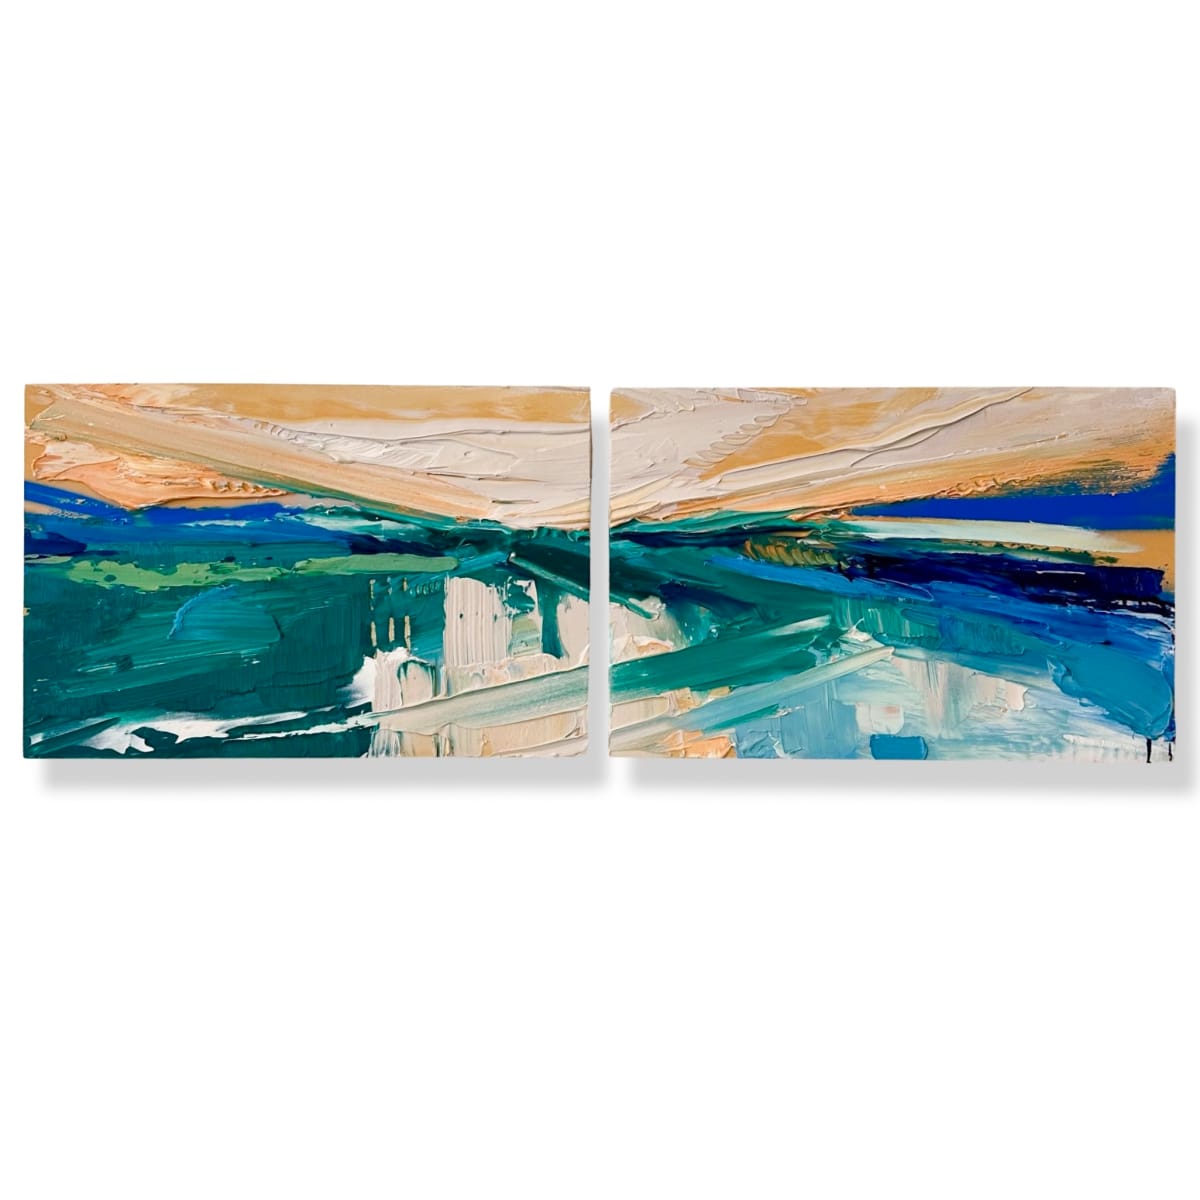 Ports by Samantha Williams-Chapelsky  Image: Diptych - two paneled painting 